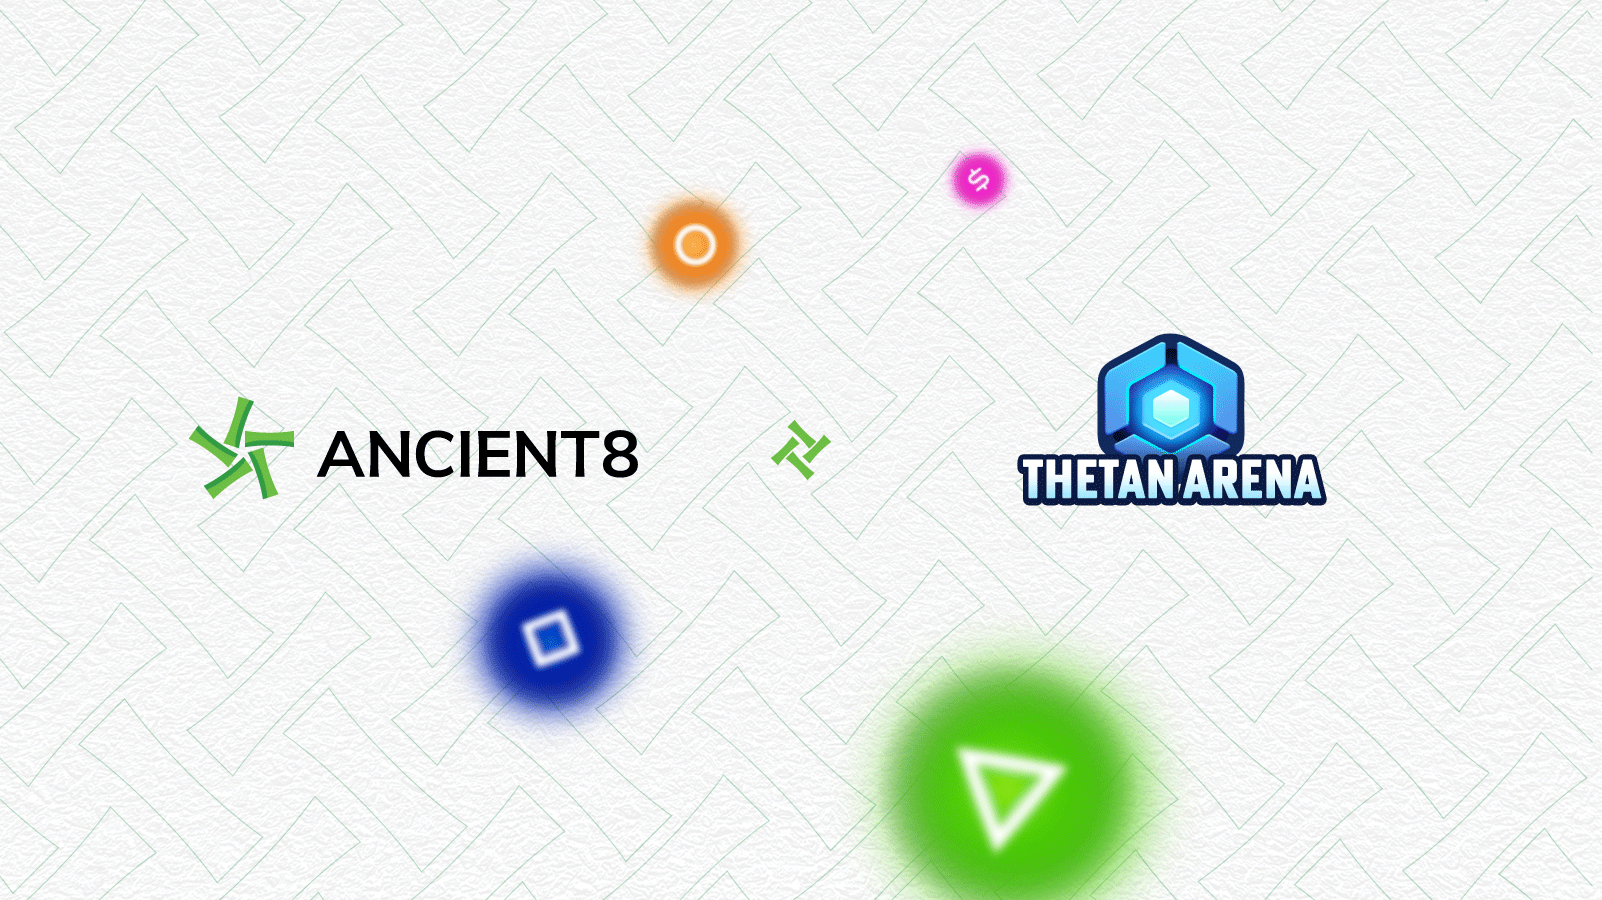 Ancient8 cooperates with Thetan Arena, bringing a new breath to the P2E gaming community